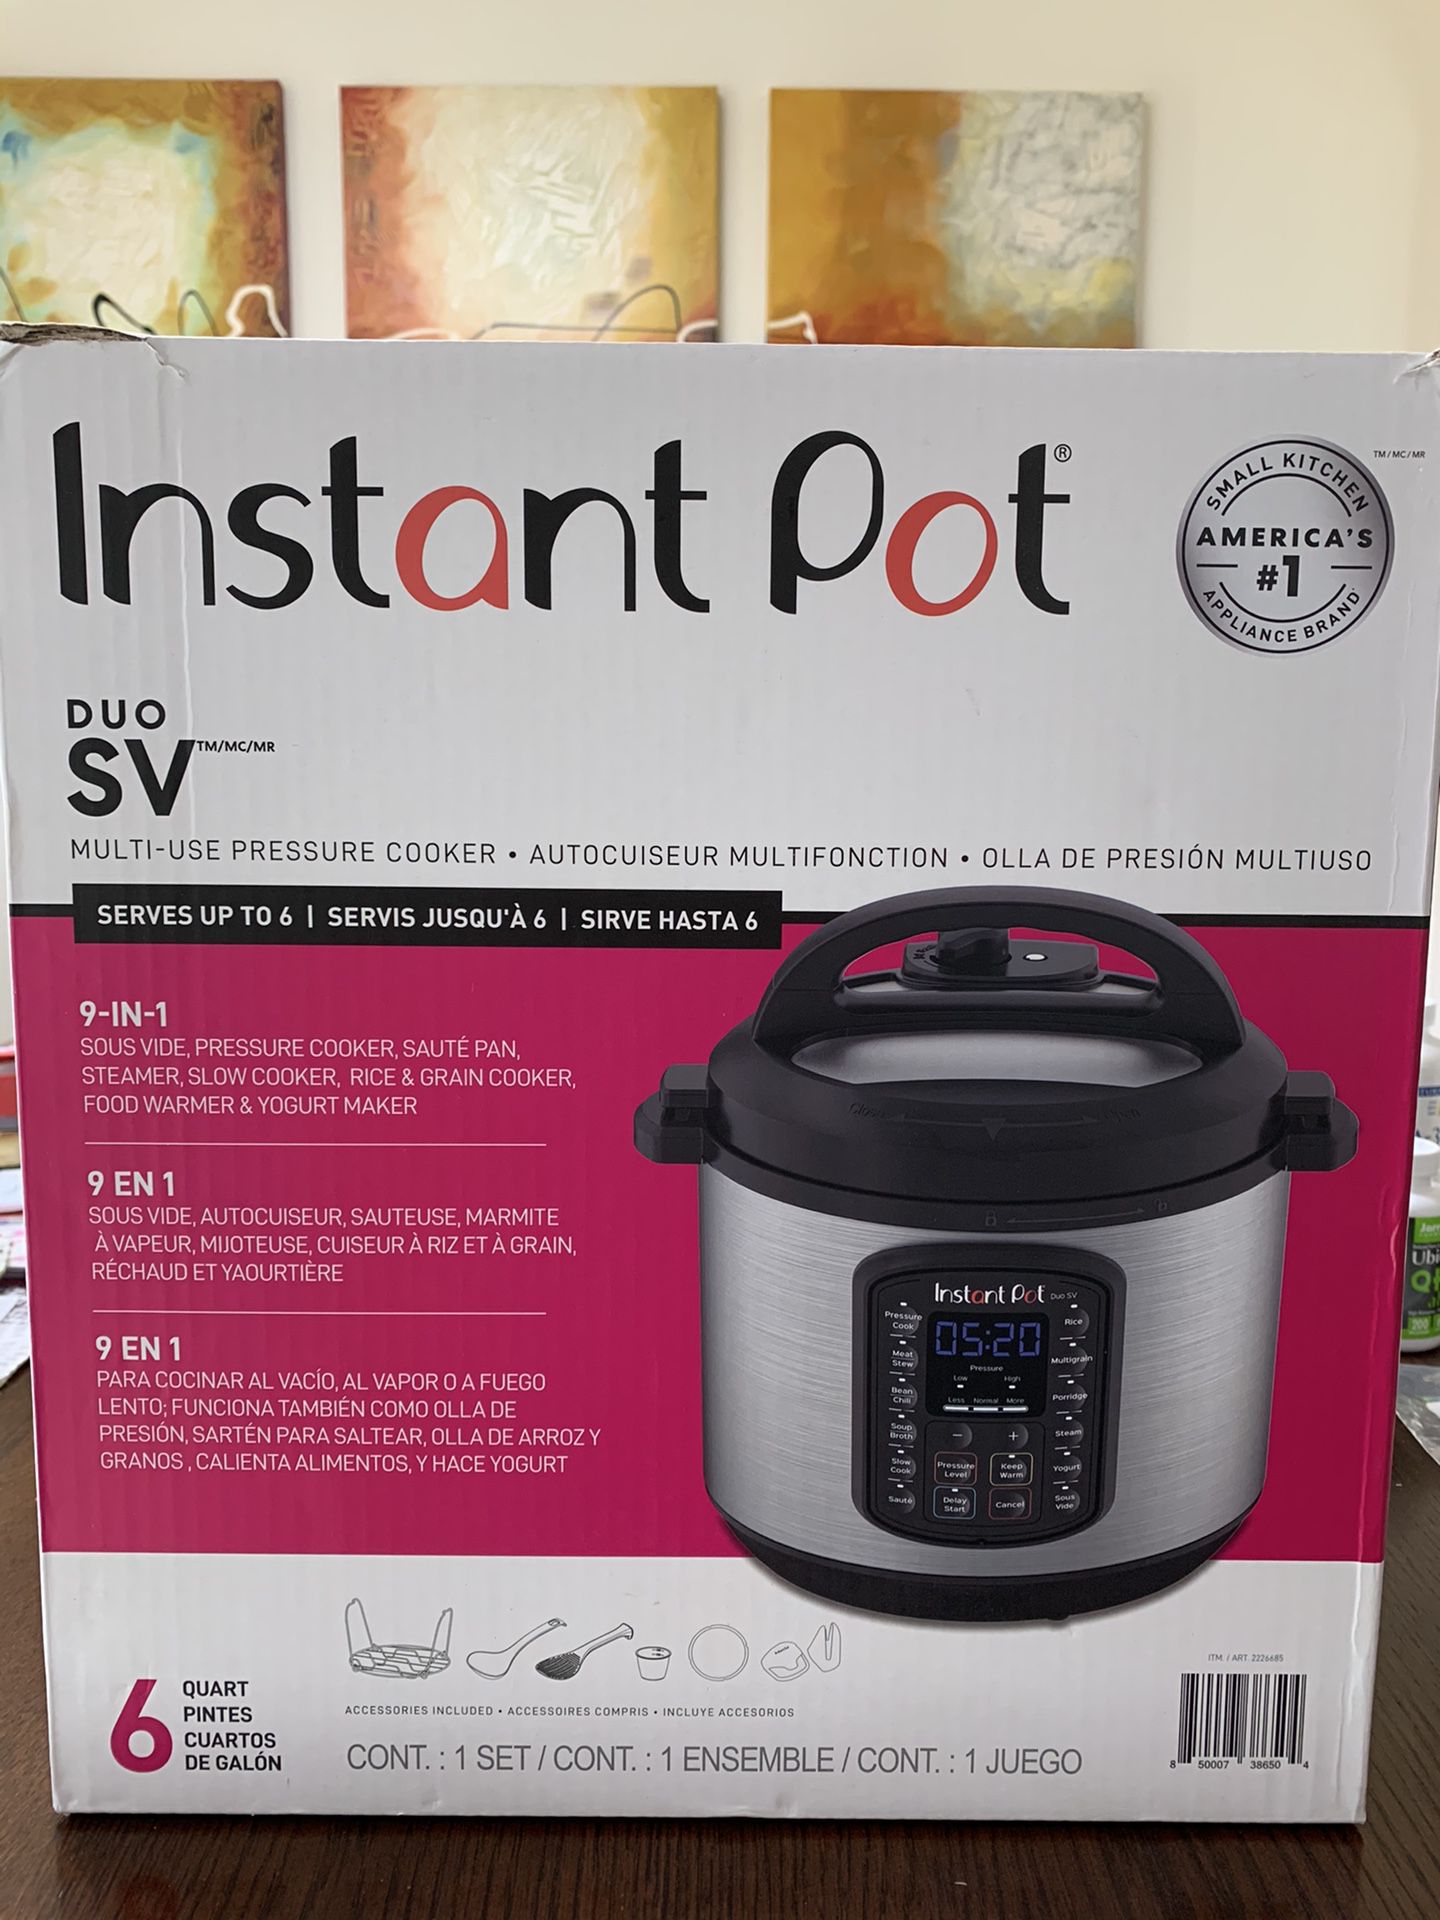 INSTANT POT DUO SV “BRAND NEW”